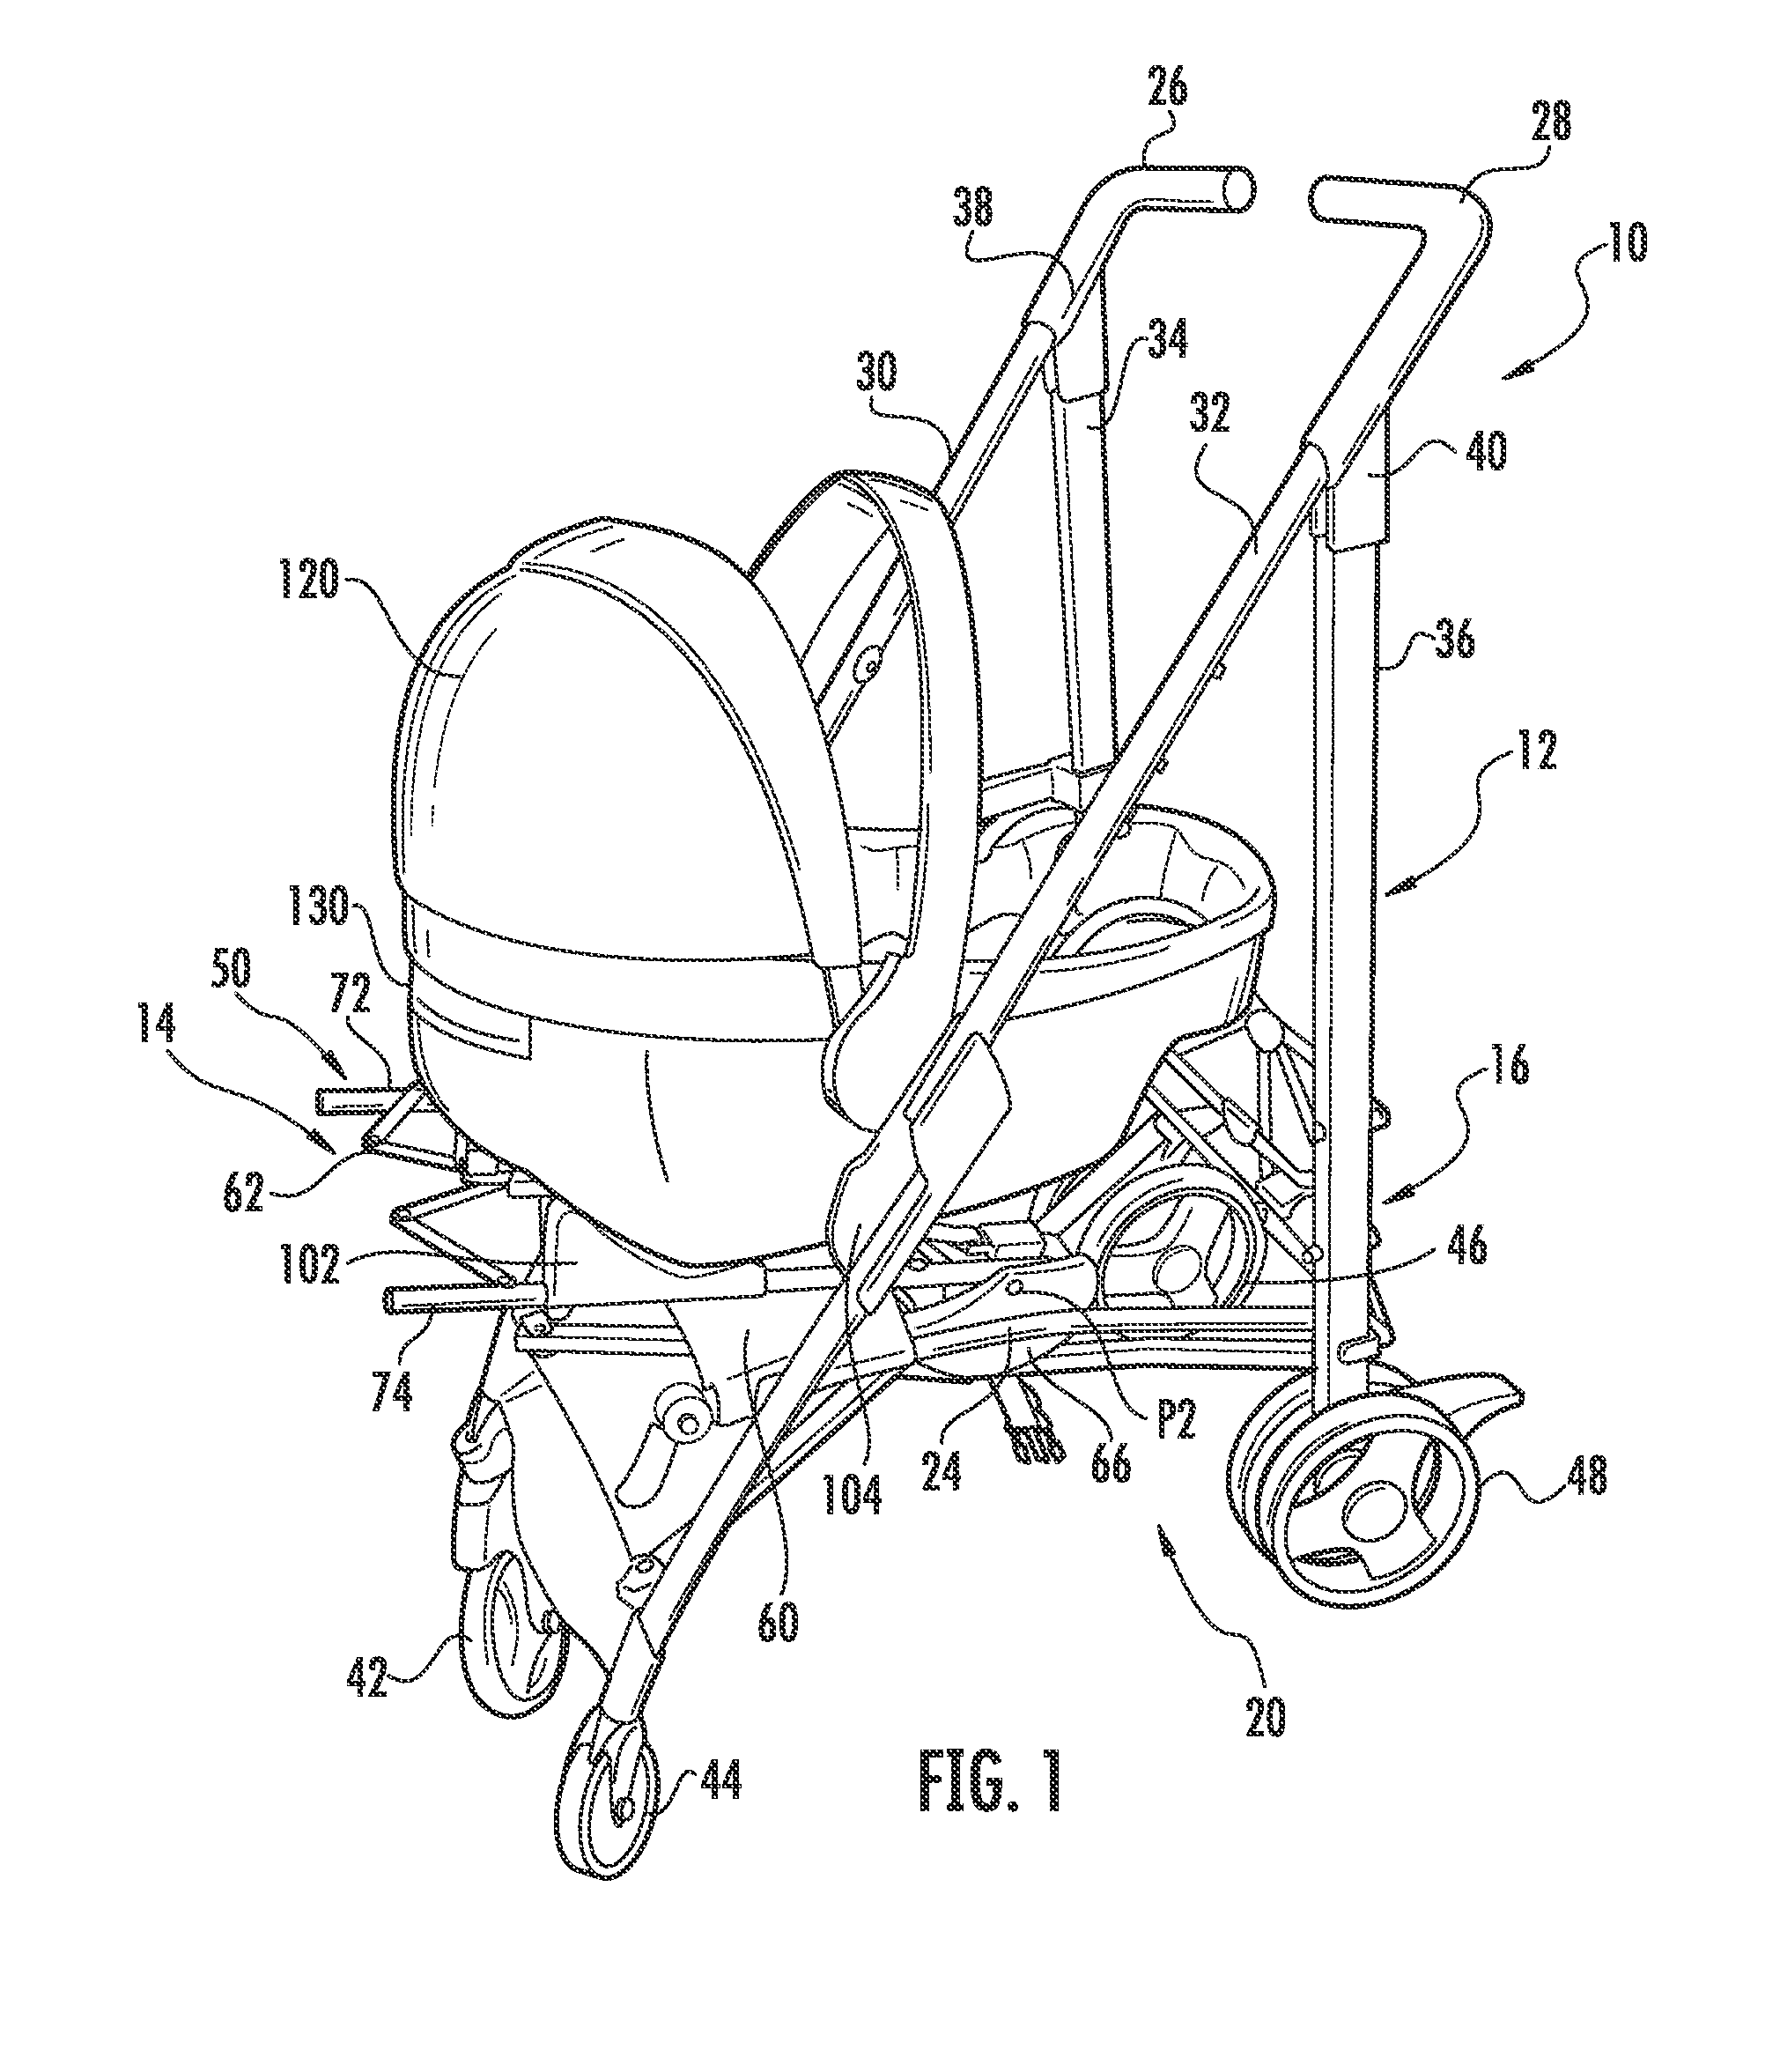 Stroller with travel seat attachment